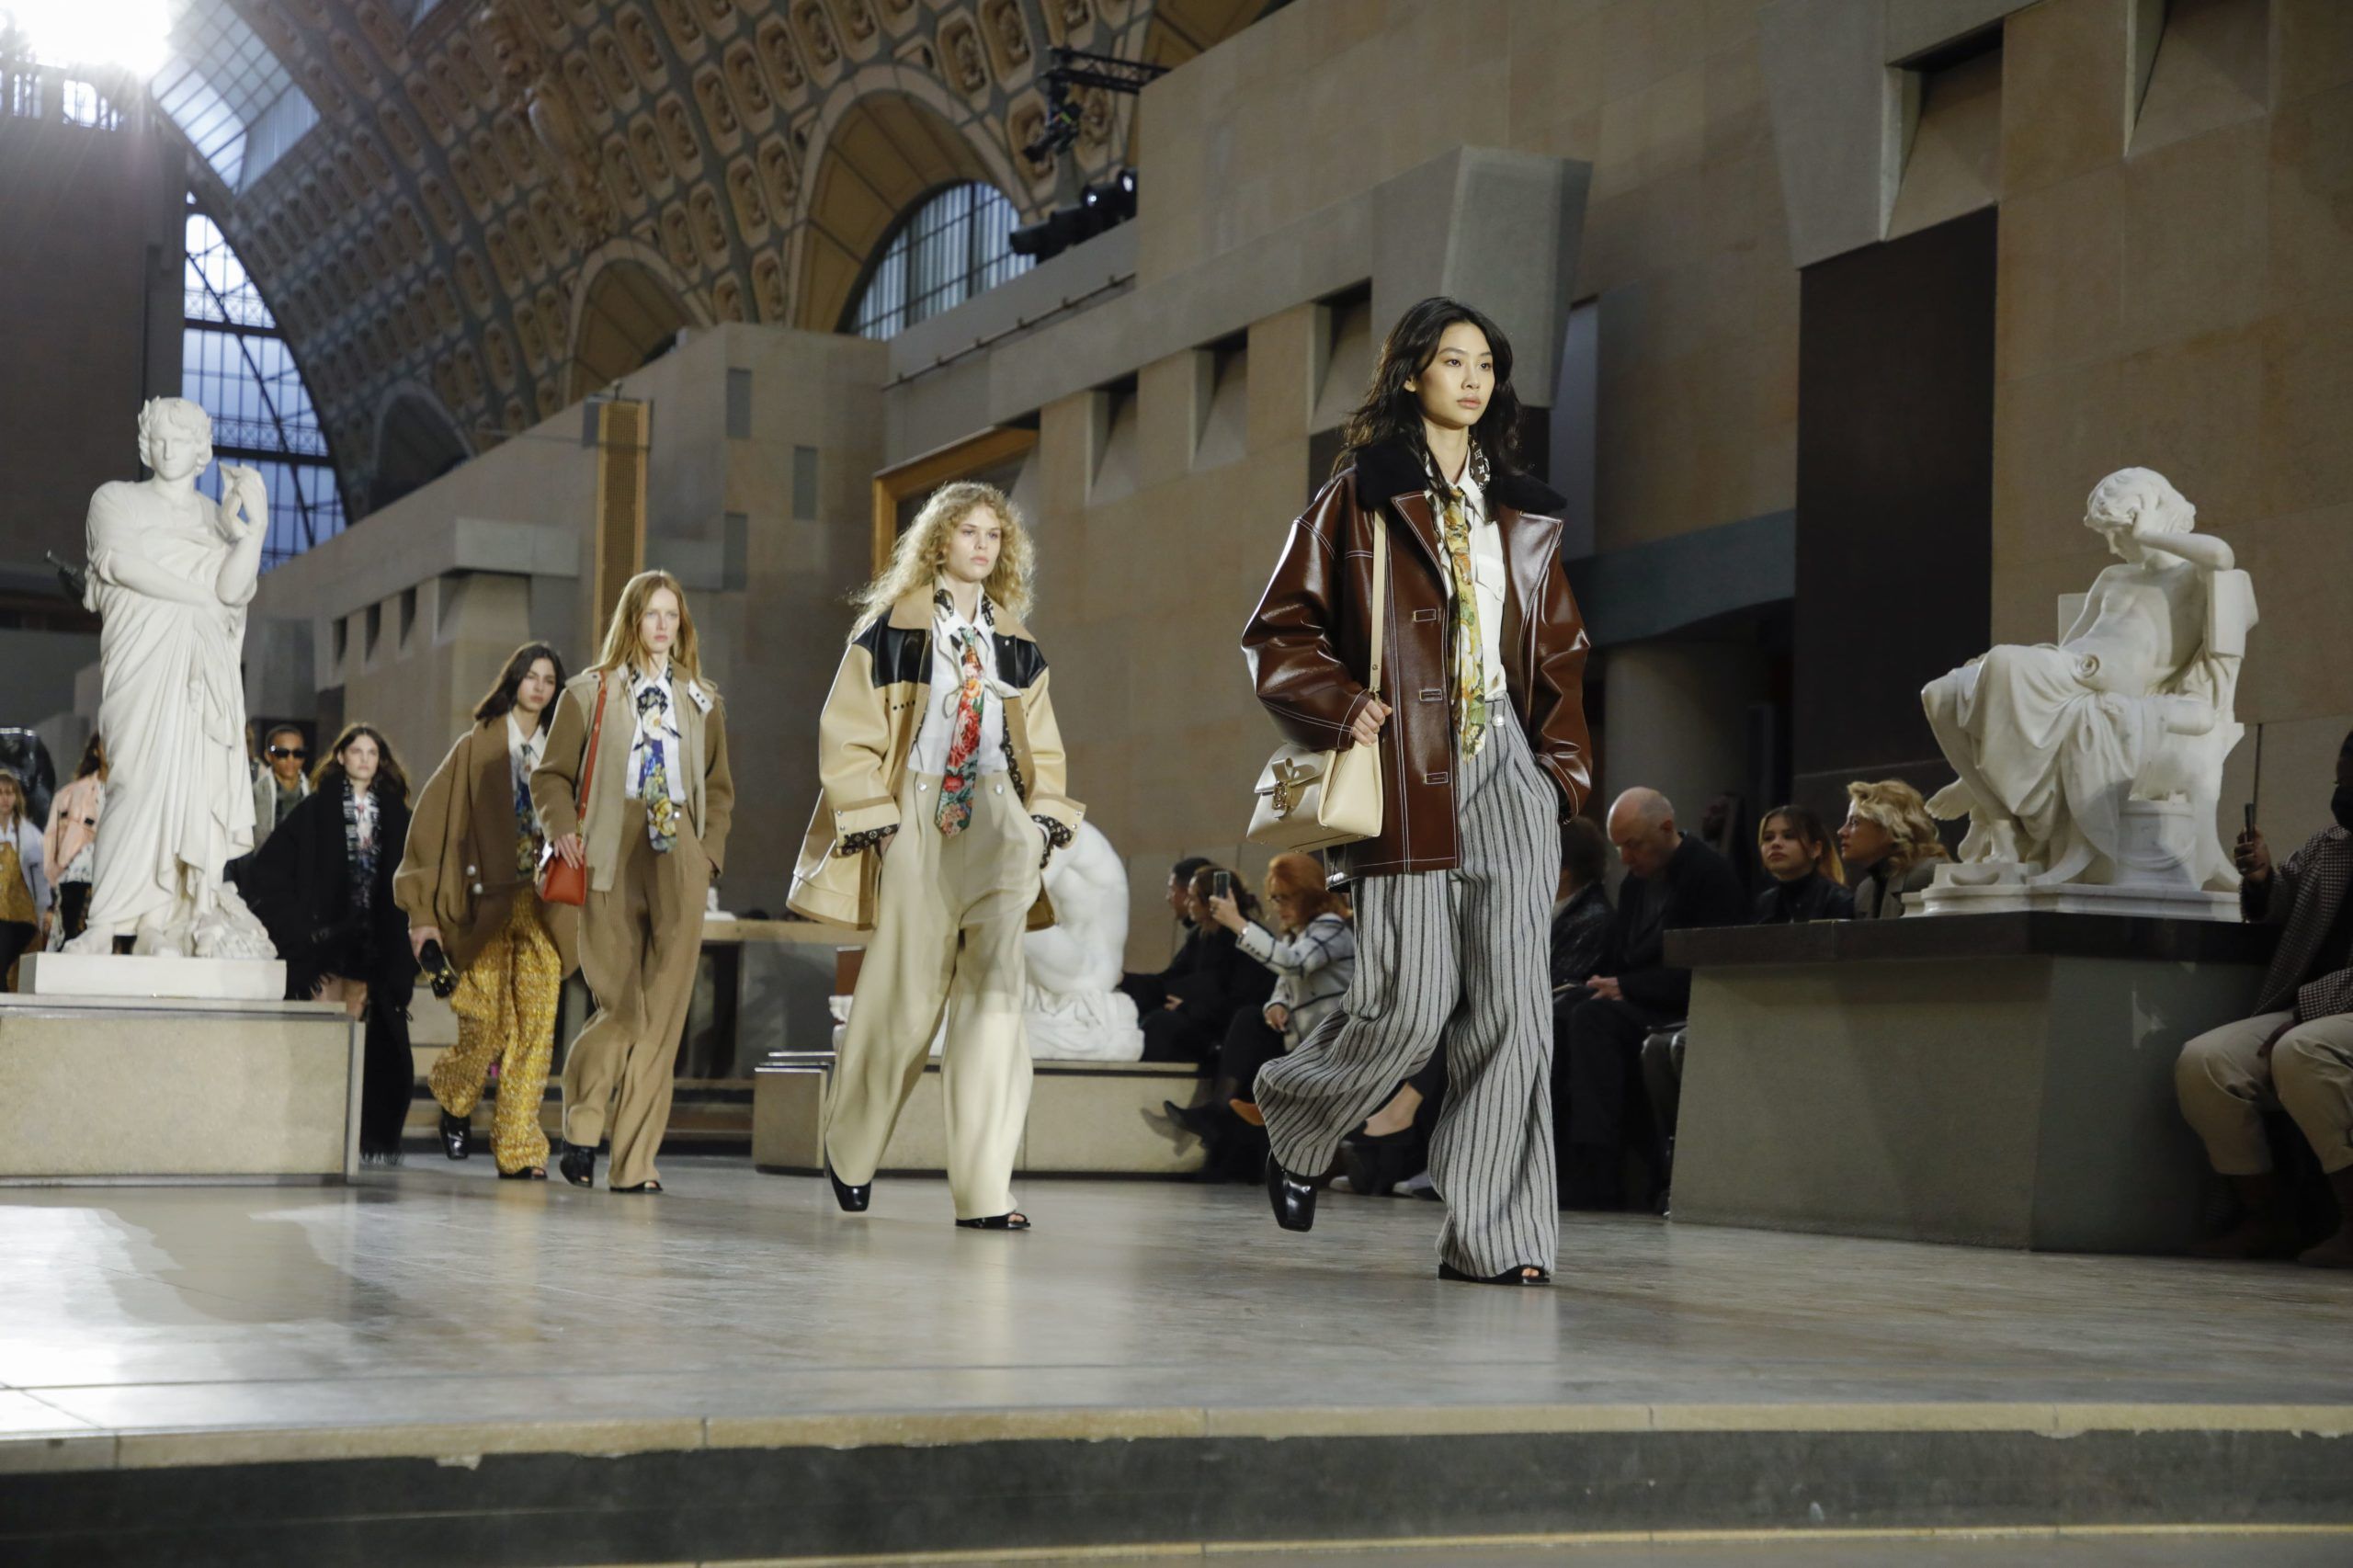 Drooling over the fall / winter styling of this Louis Vuitton